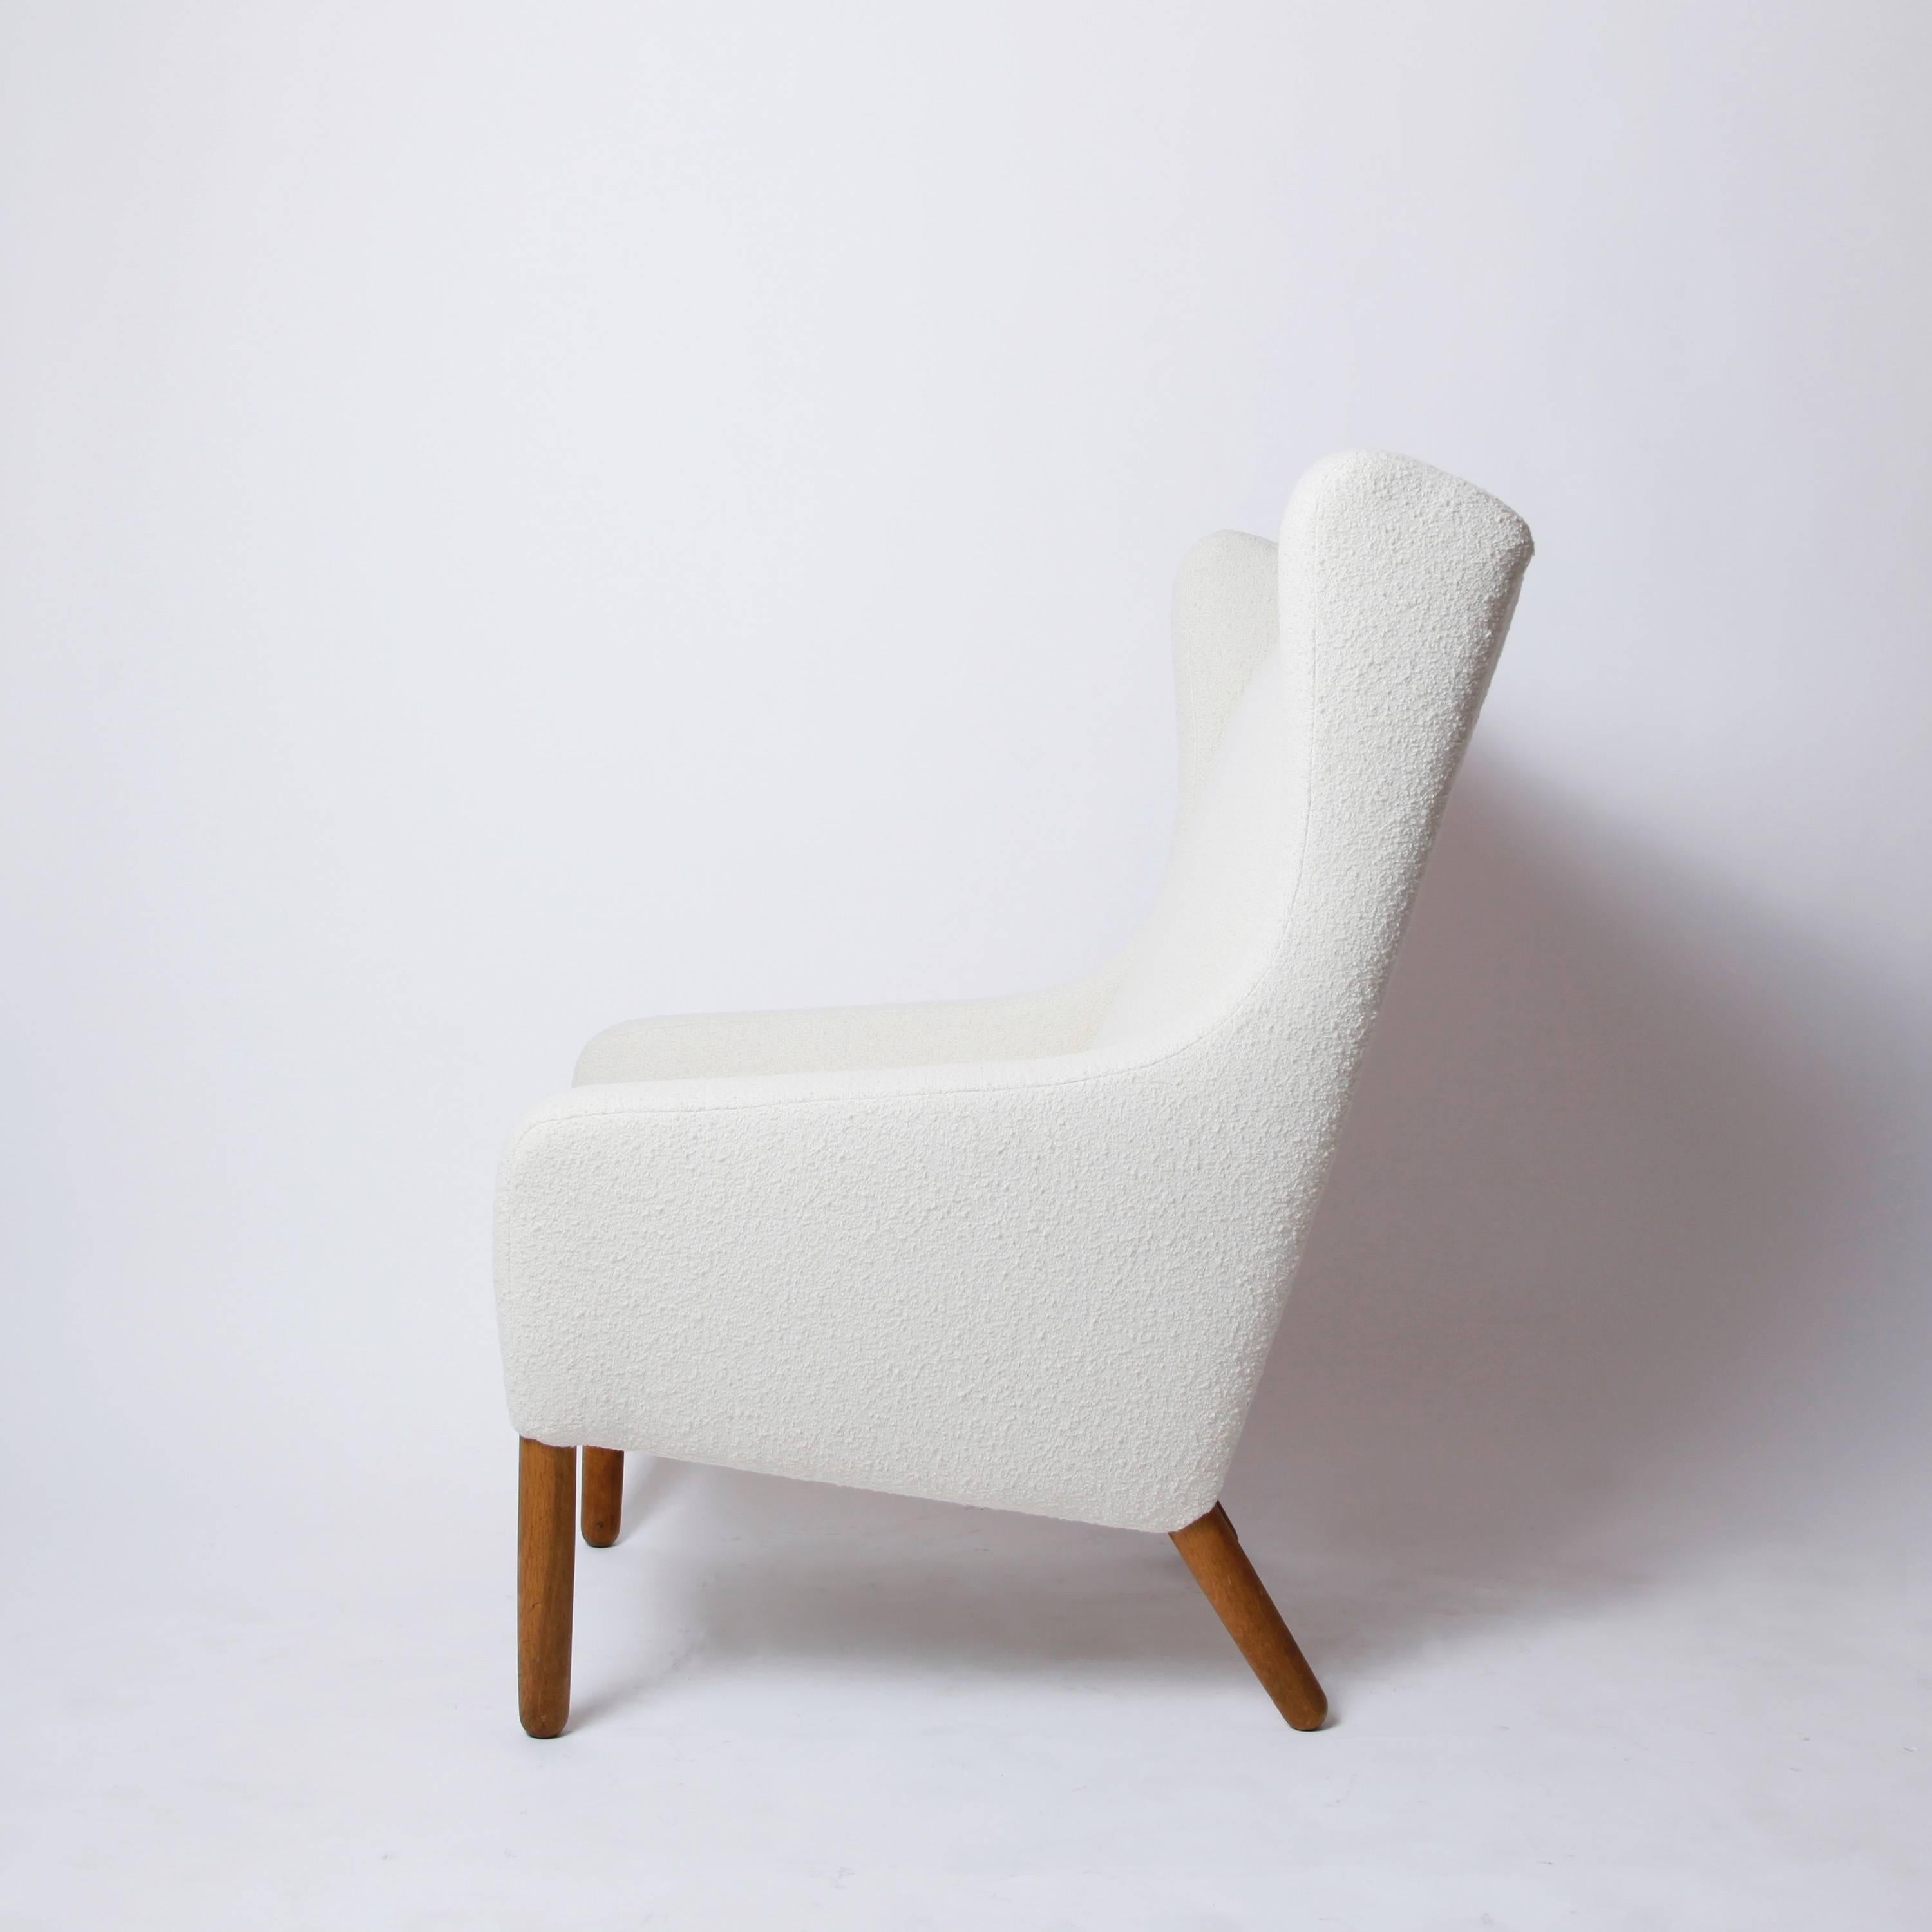 We love the clean lines and soft curves of this Danish wingback chair. It is extremely modern, but as welcoming as one of the centuries-older iterations that probably inspired its design. The sturdy cylindrical front legs follow the line of the